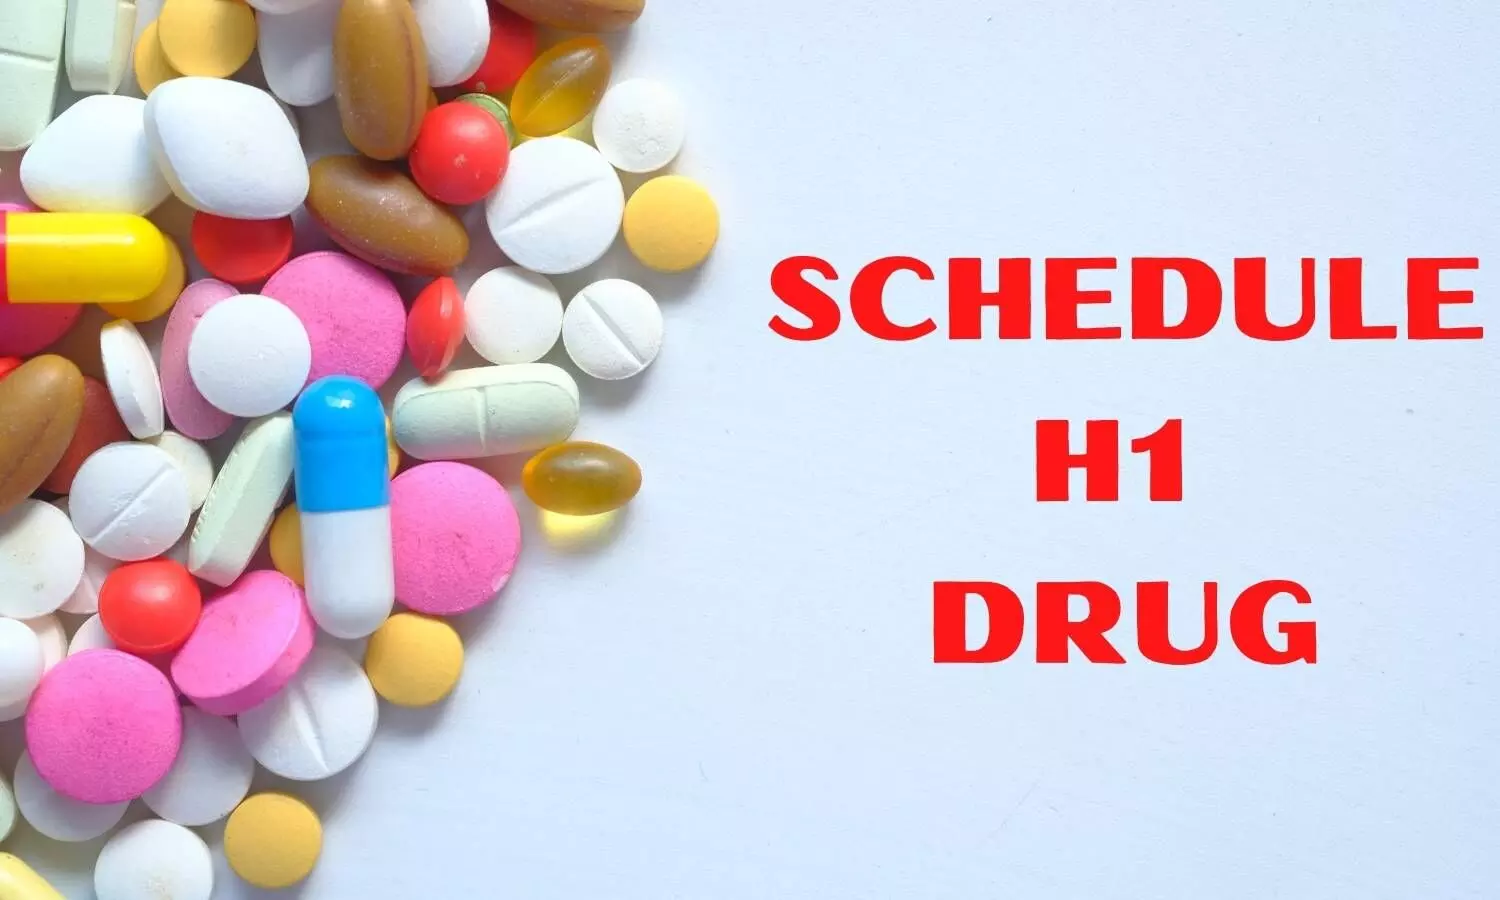 Denying Abbott proposal DTAB rules Zolpidem continues to be Schedule H1 drug